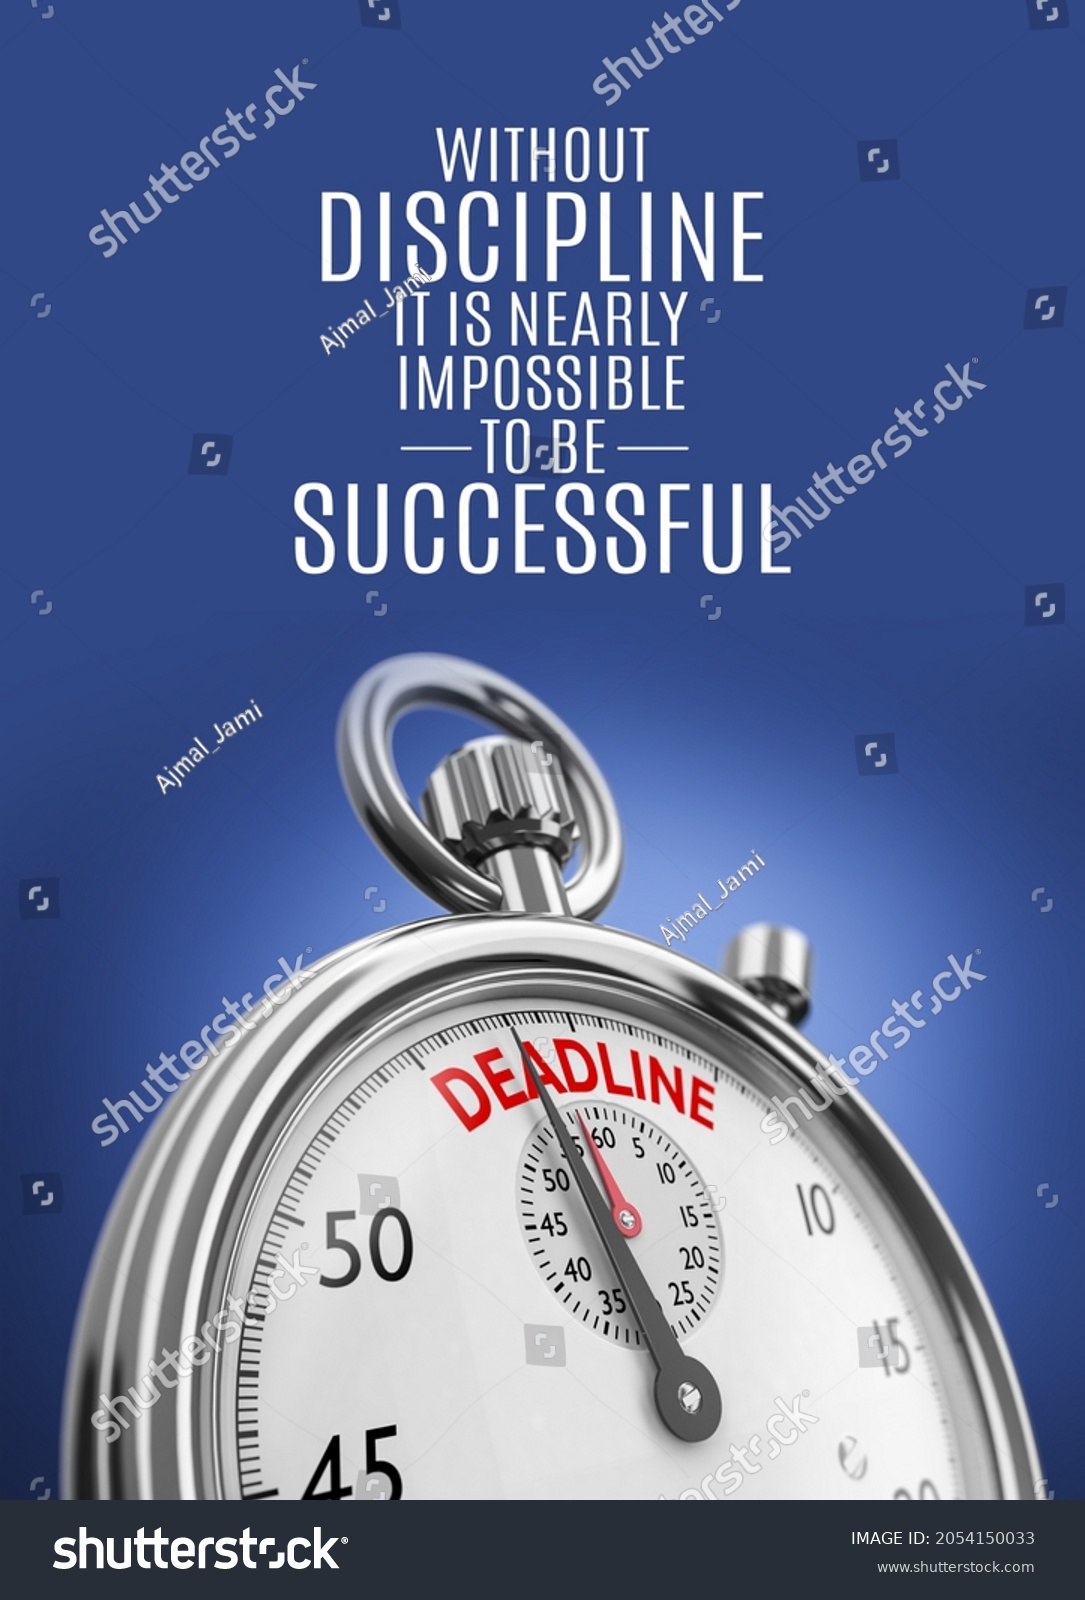 motivational inspirational positive life quote about that without discipline it is nearly impossible to be successful with stop watch and blue background #2054150033